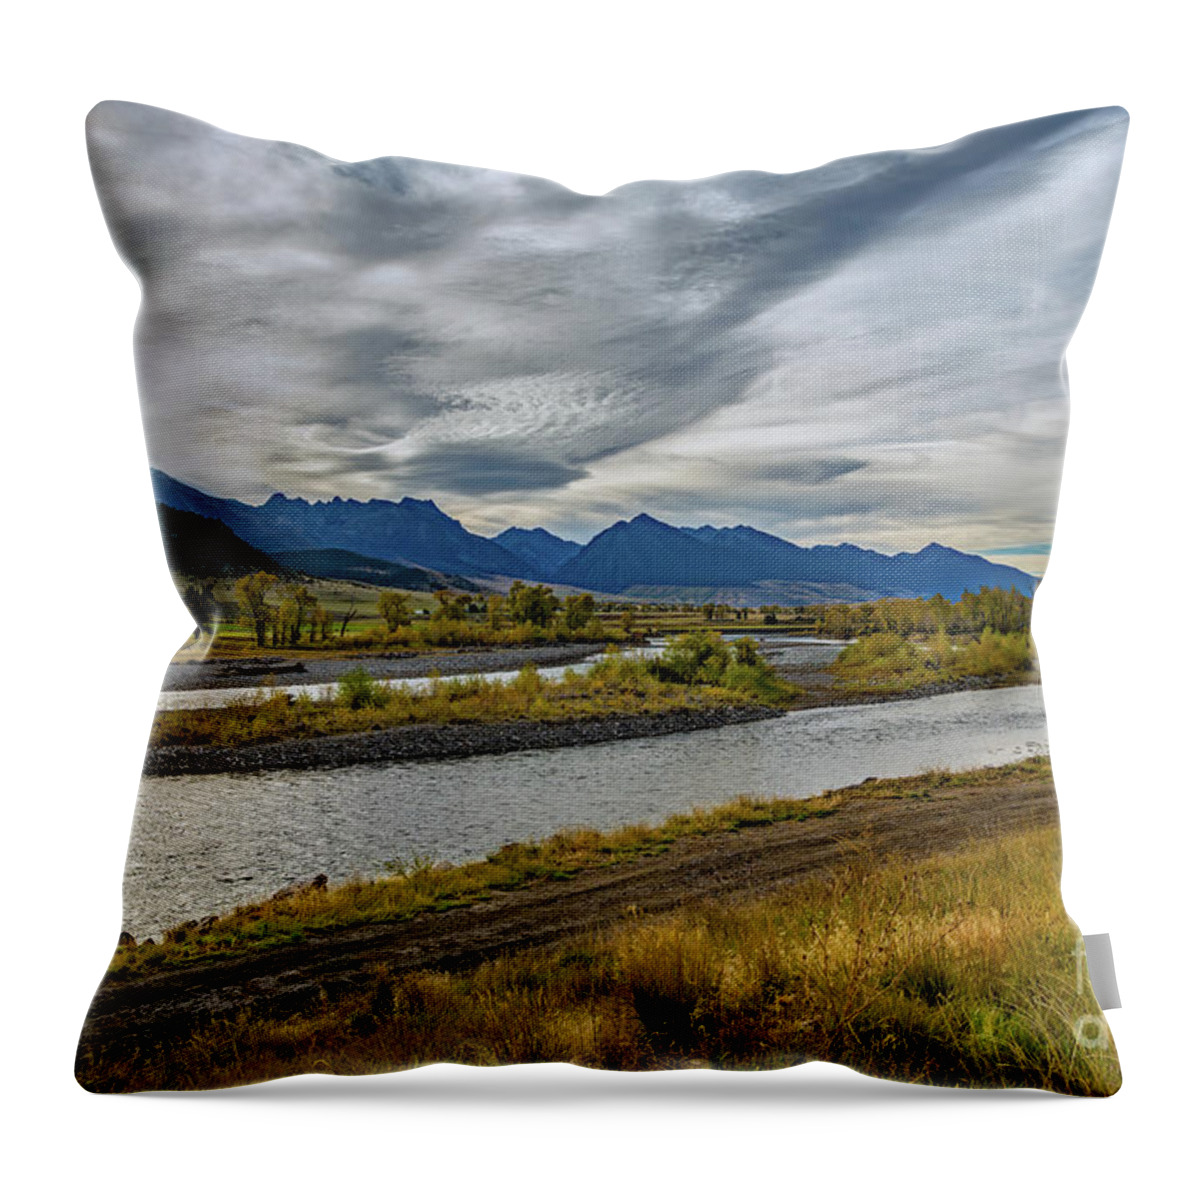 Jon Burch Throw Pillow featuring the photograph Paradise Valley by Jon Burch Photography